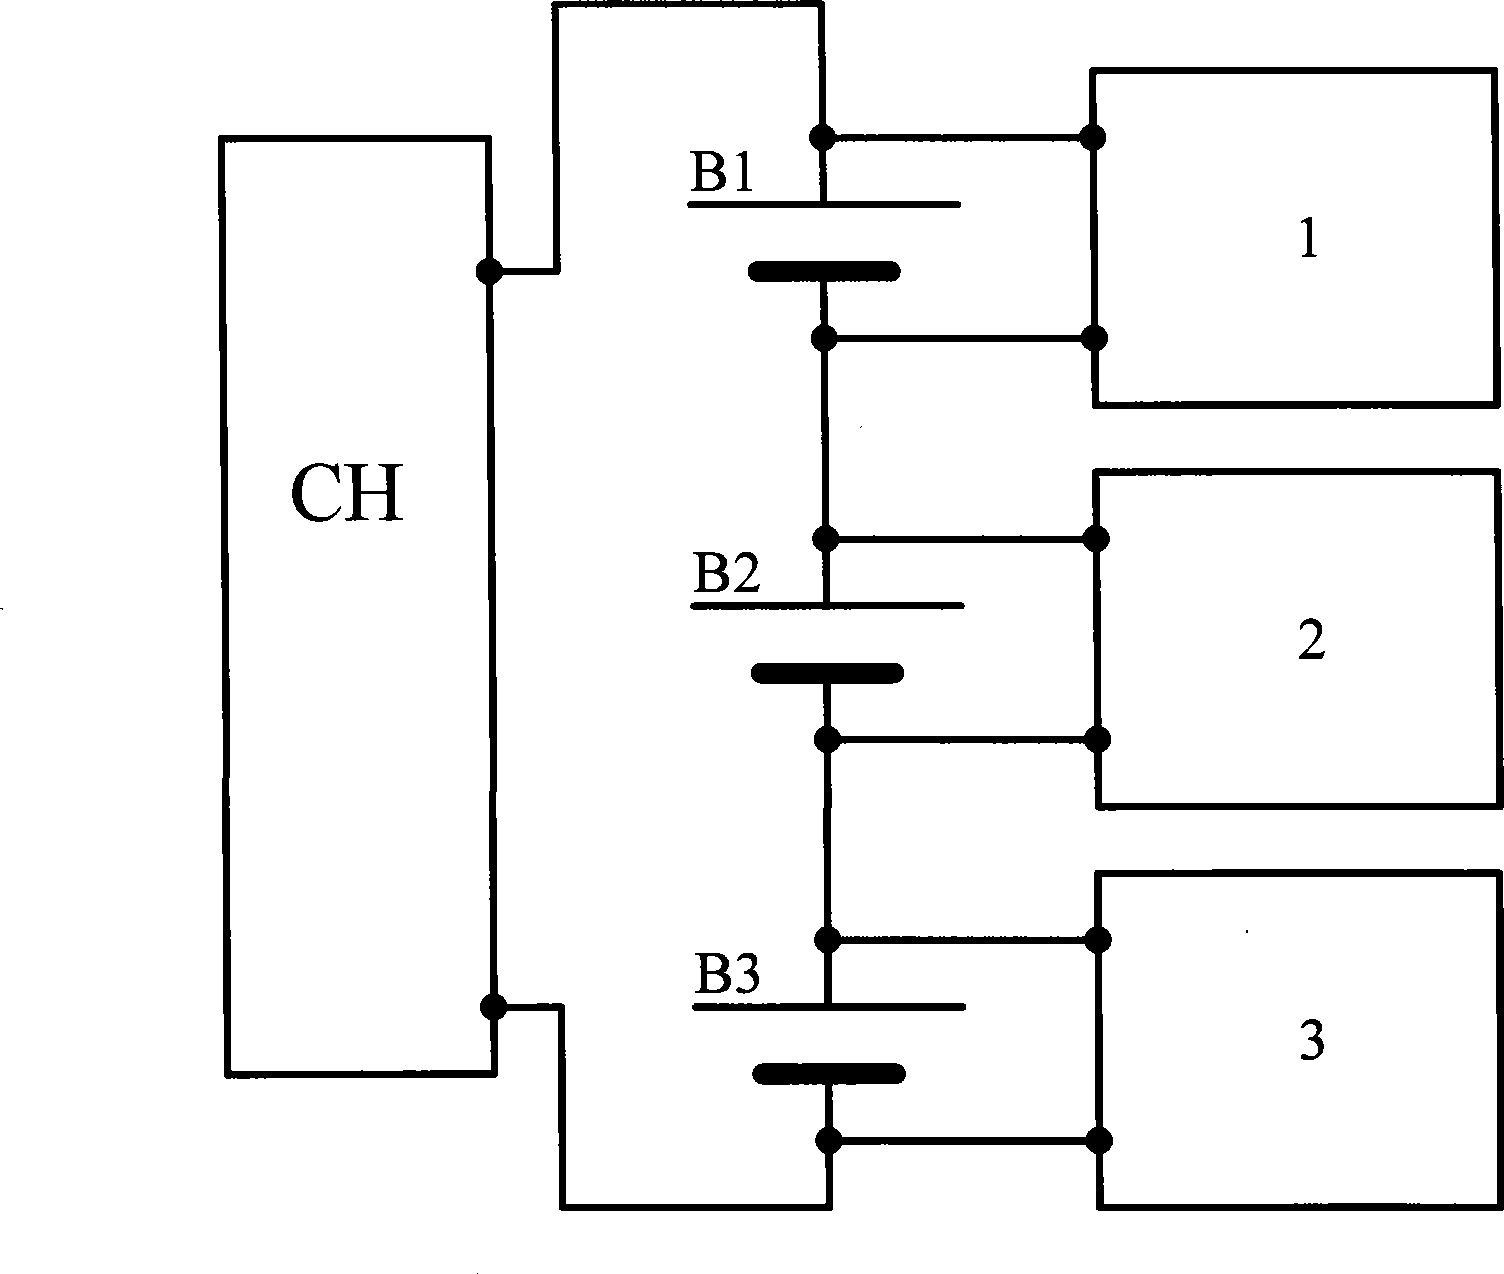 Equalized charging apparatus used for series batteries